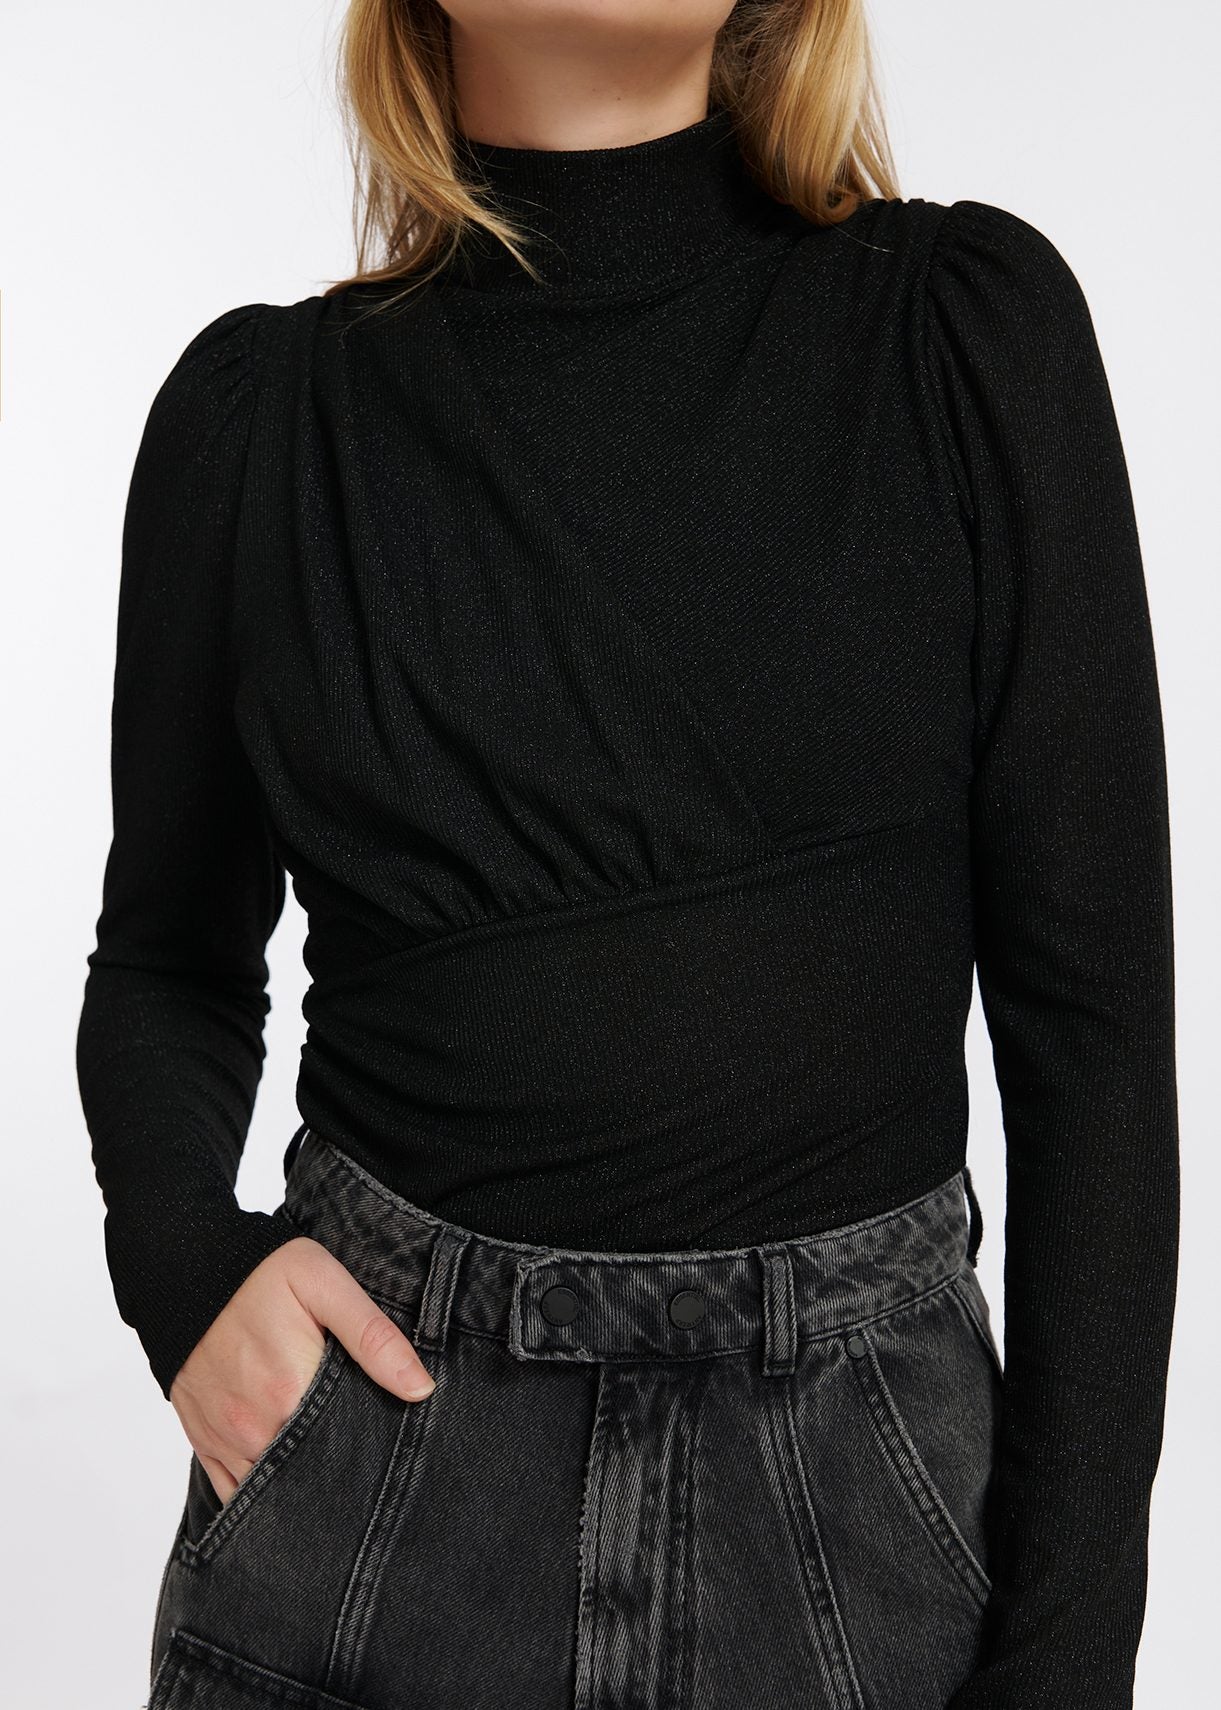 Model wears black long sleeve top with ruching on chest.